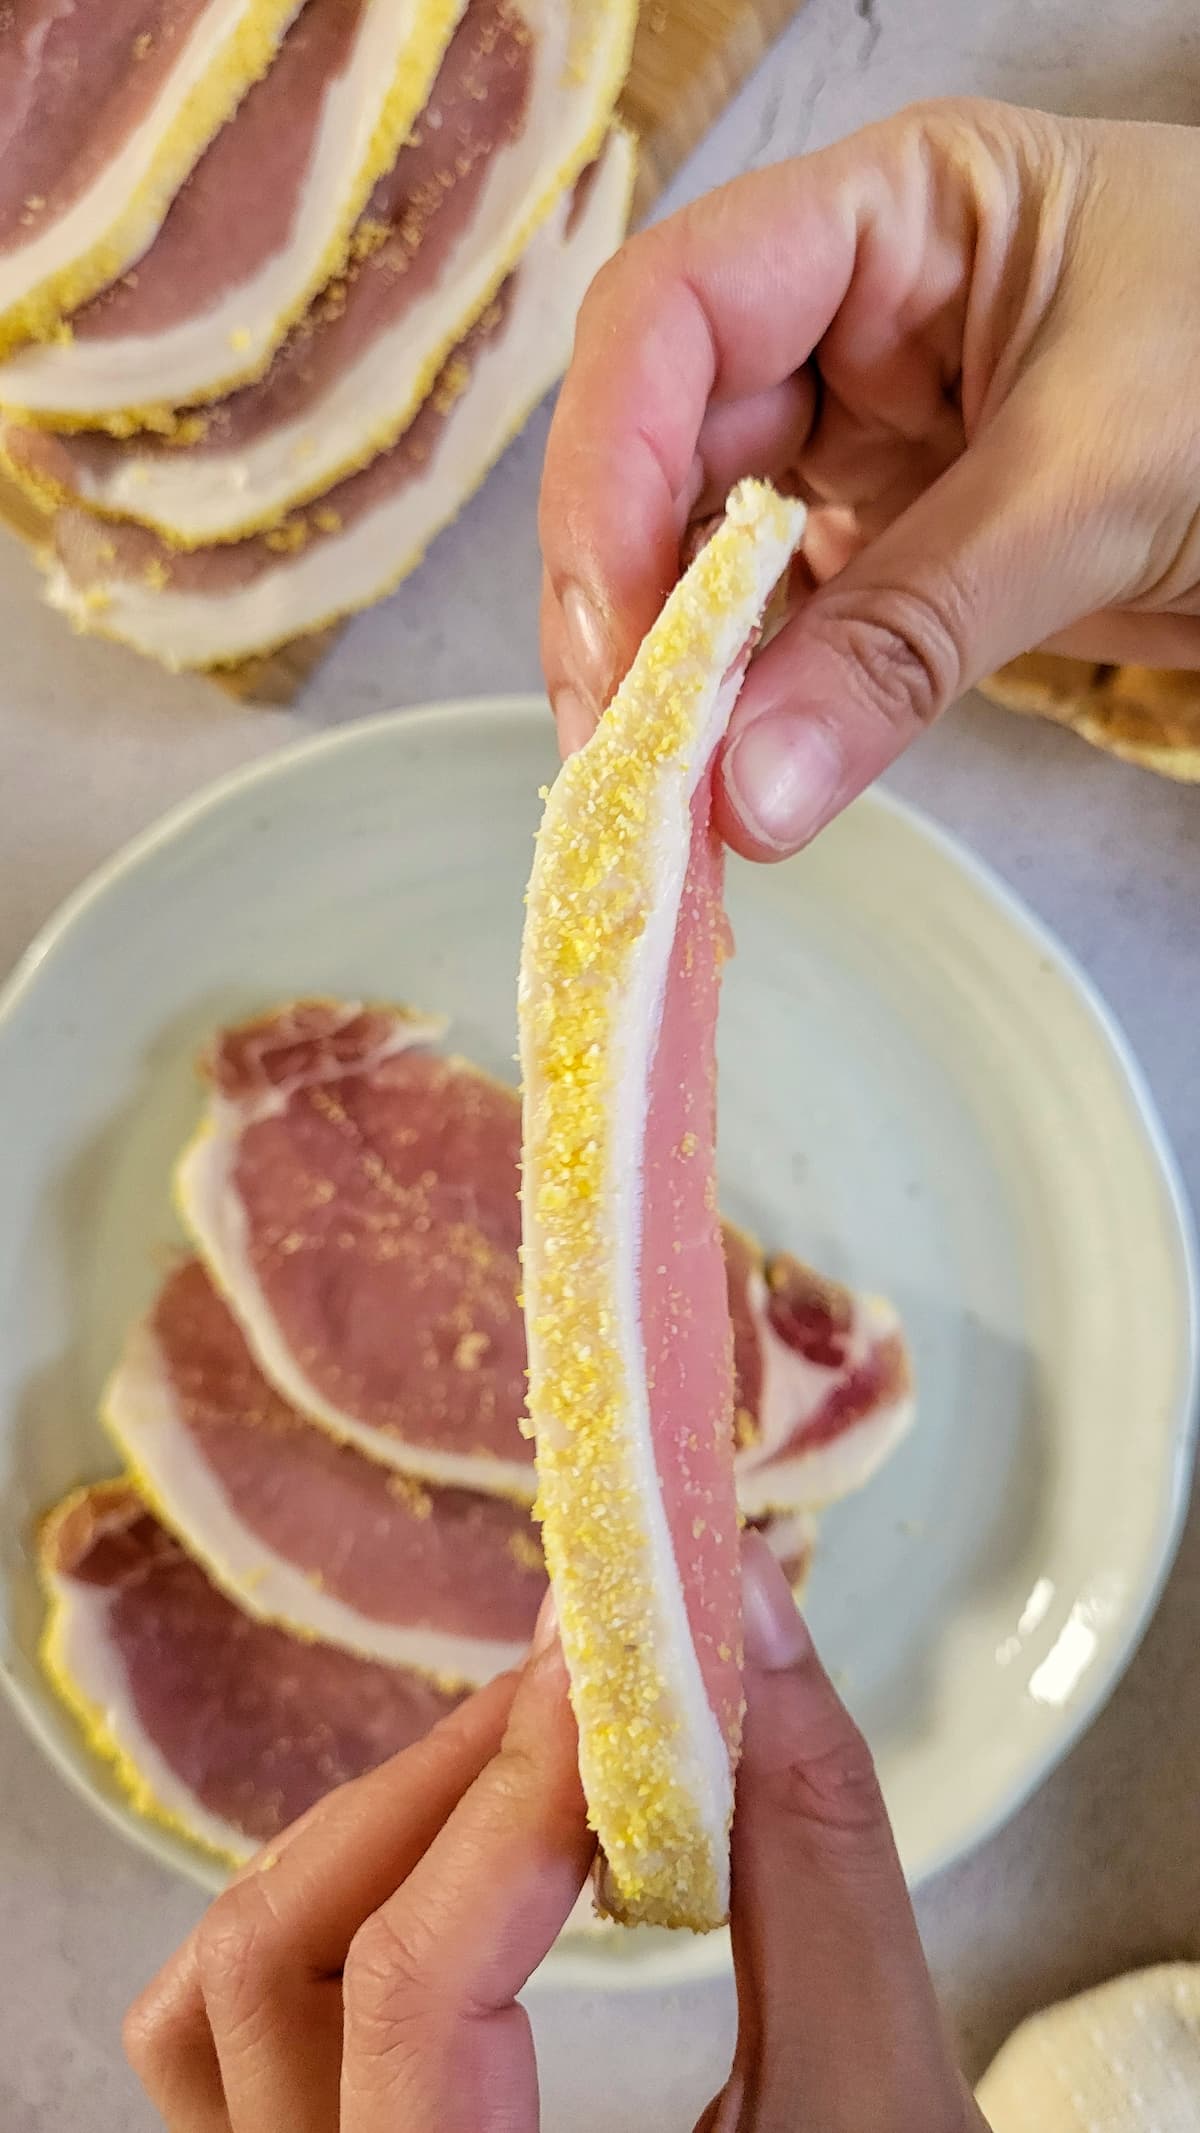 hand holding a raw slice of peameal bacon on its side over a plate with more